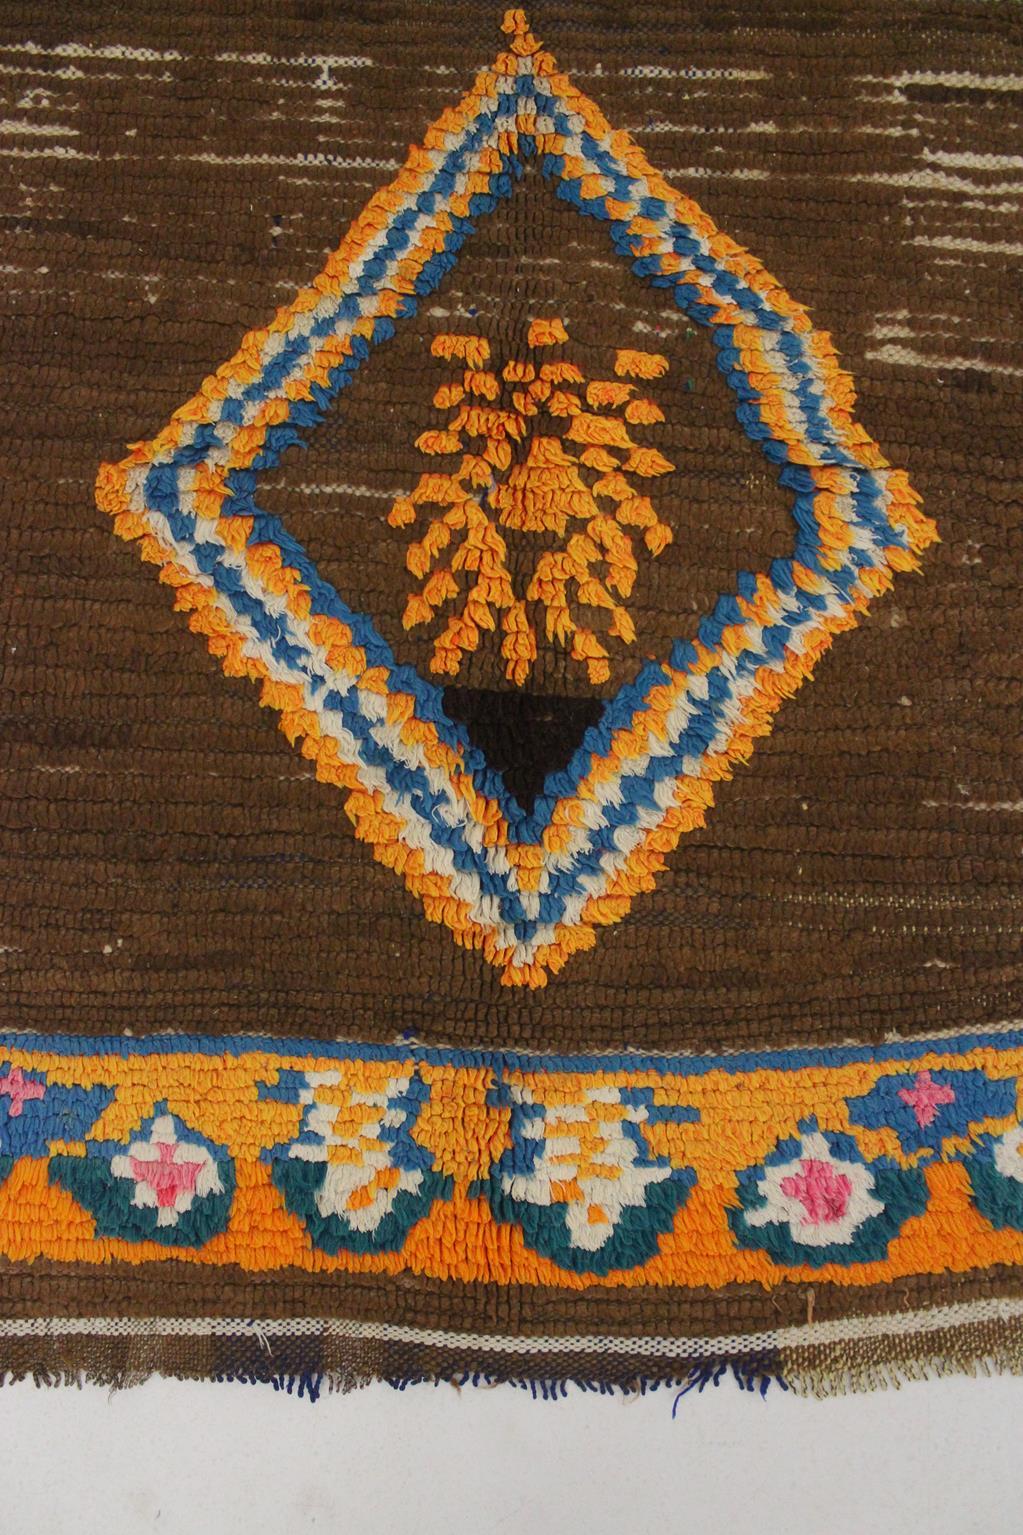 20th Century Vintage Moroccan Boujad runner rug - Brown/pink/blue - 3.2x7.5feet / 97x228cm For Sale